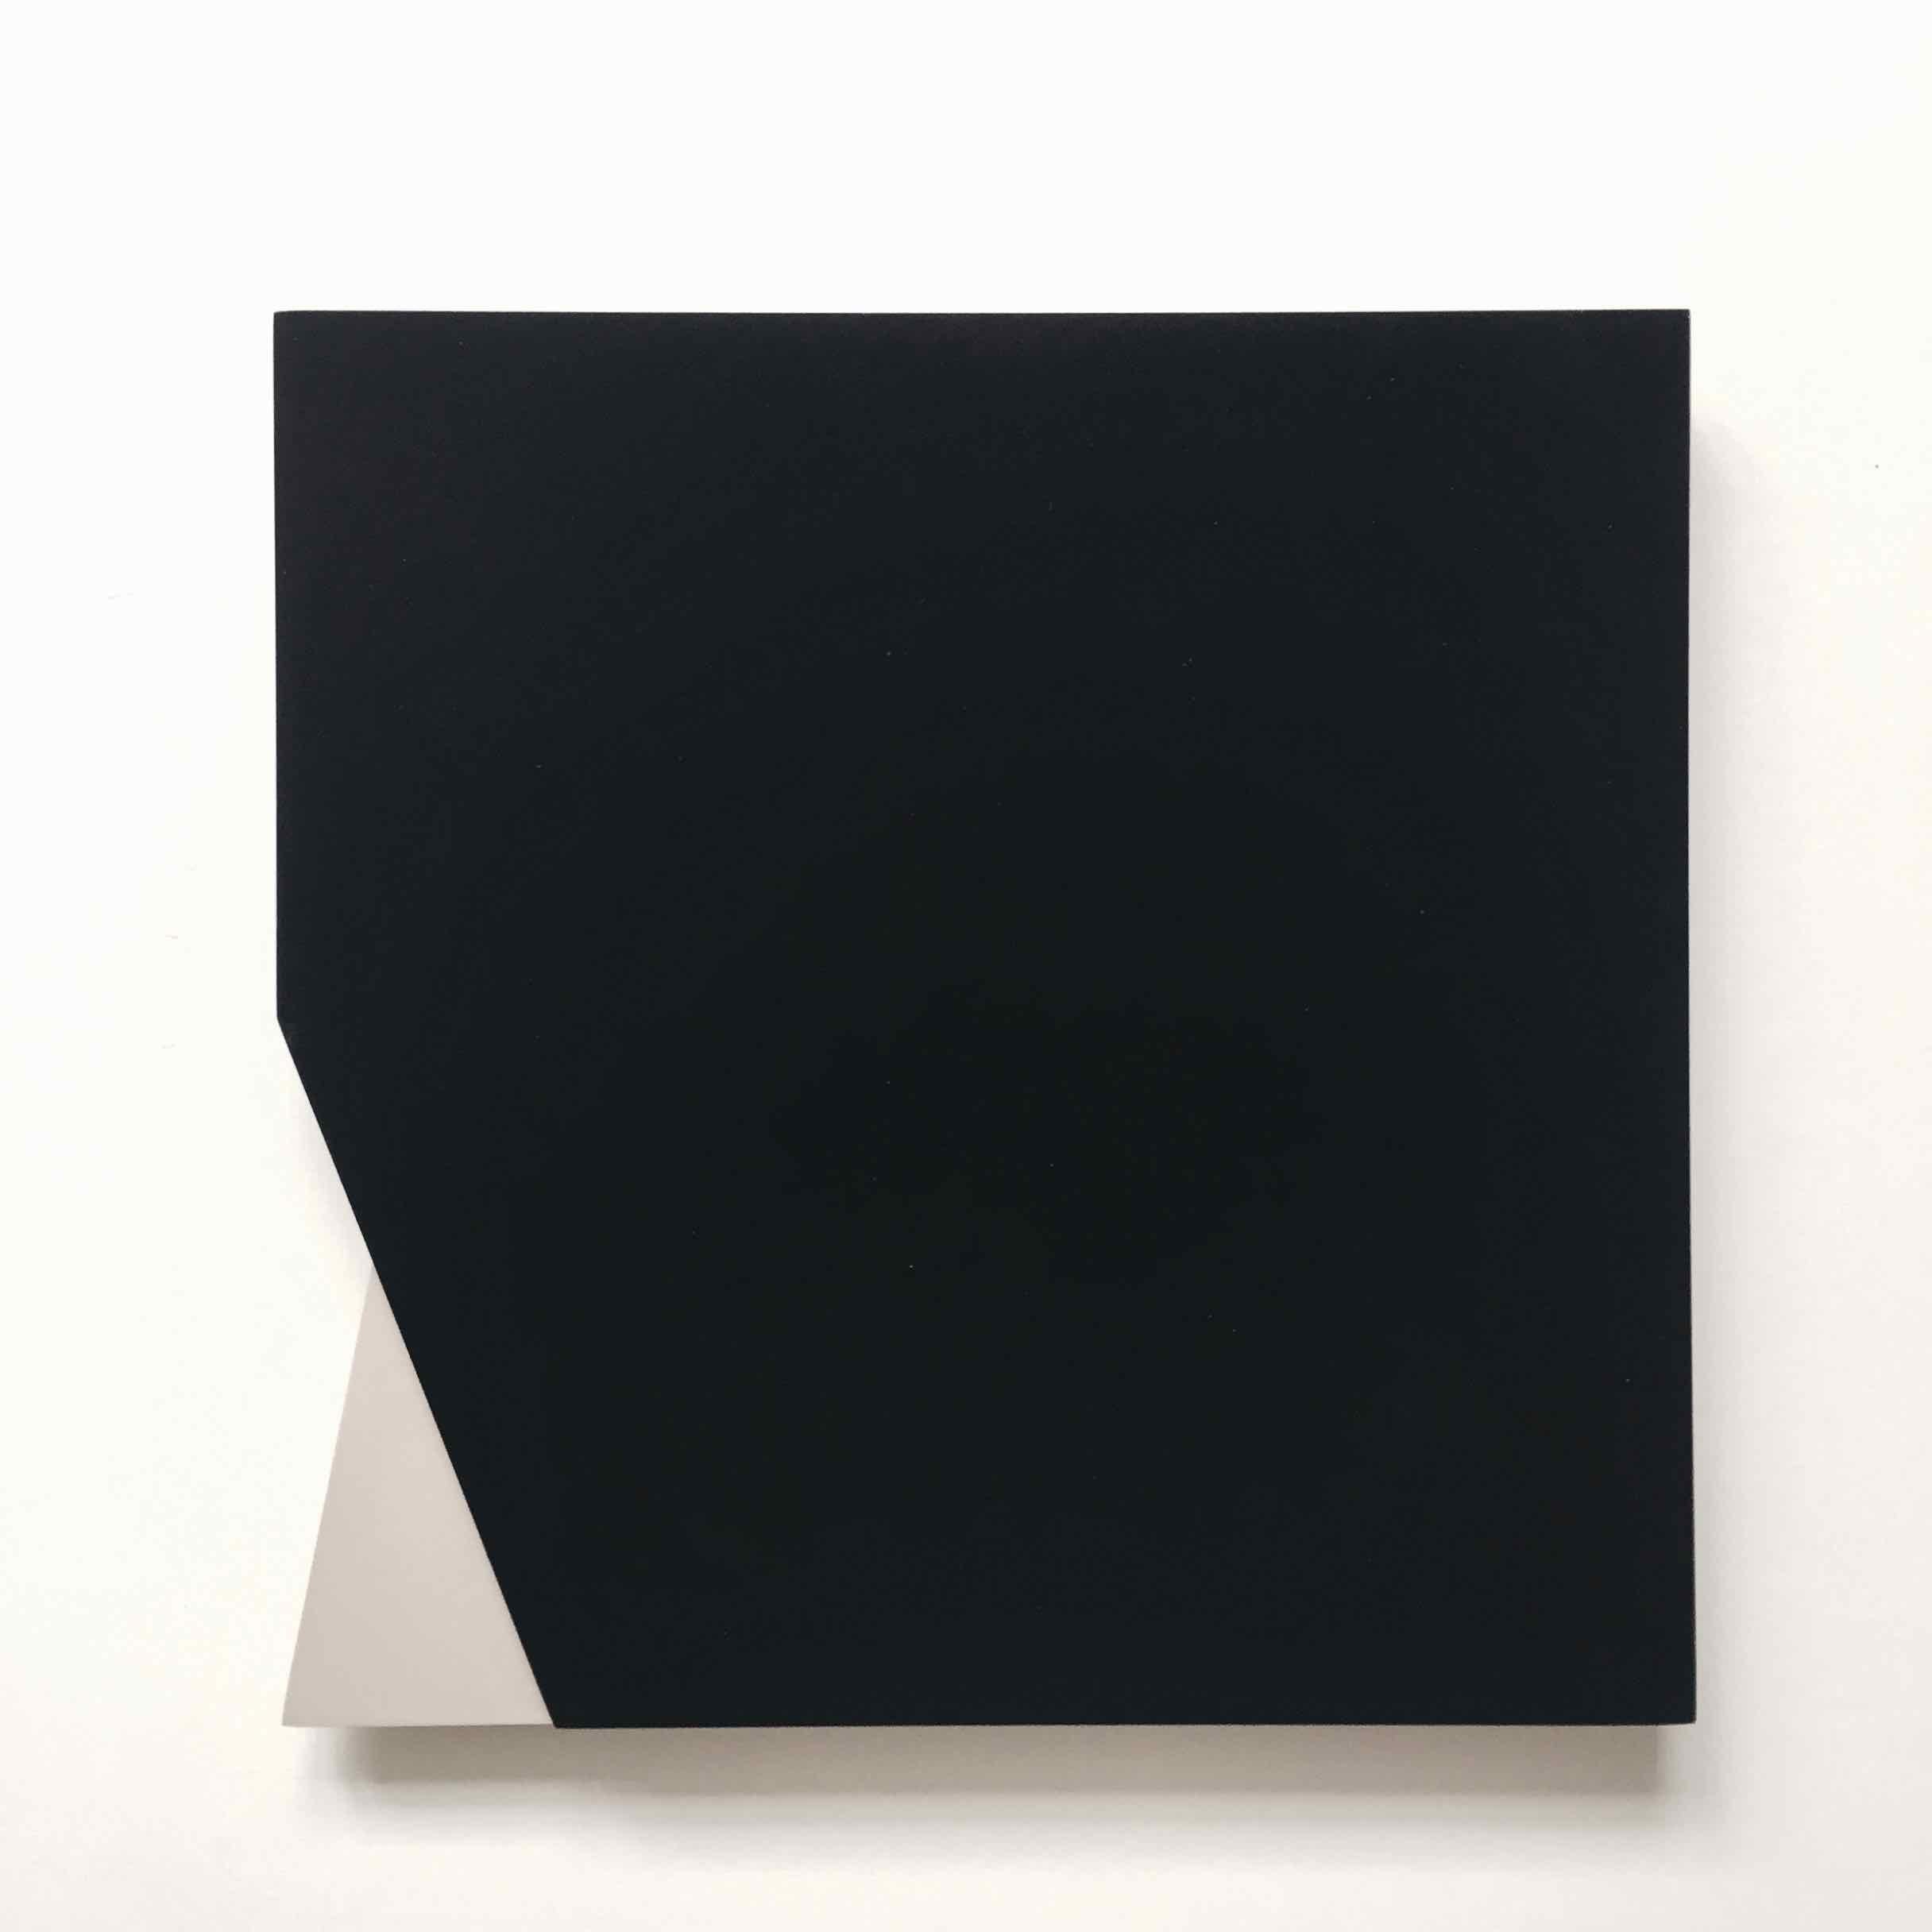 Laura Jane Scott Abstract Sculpture - 'Cut-out 20' (Number 002): Minimal Hard Edge Abstract Painting by Laura Scott